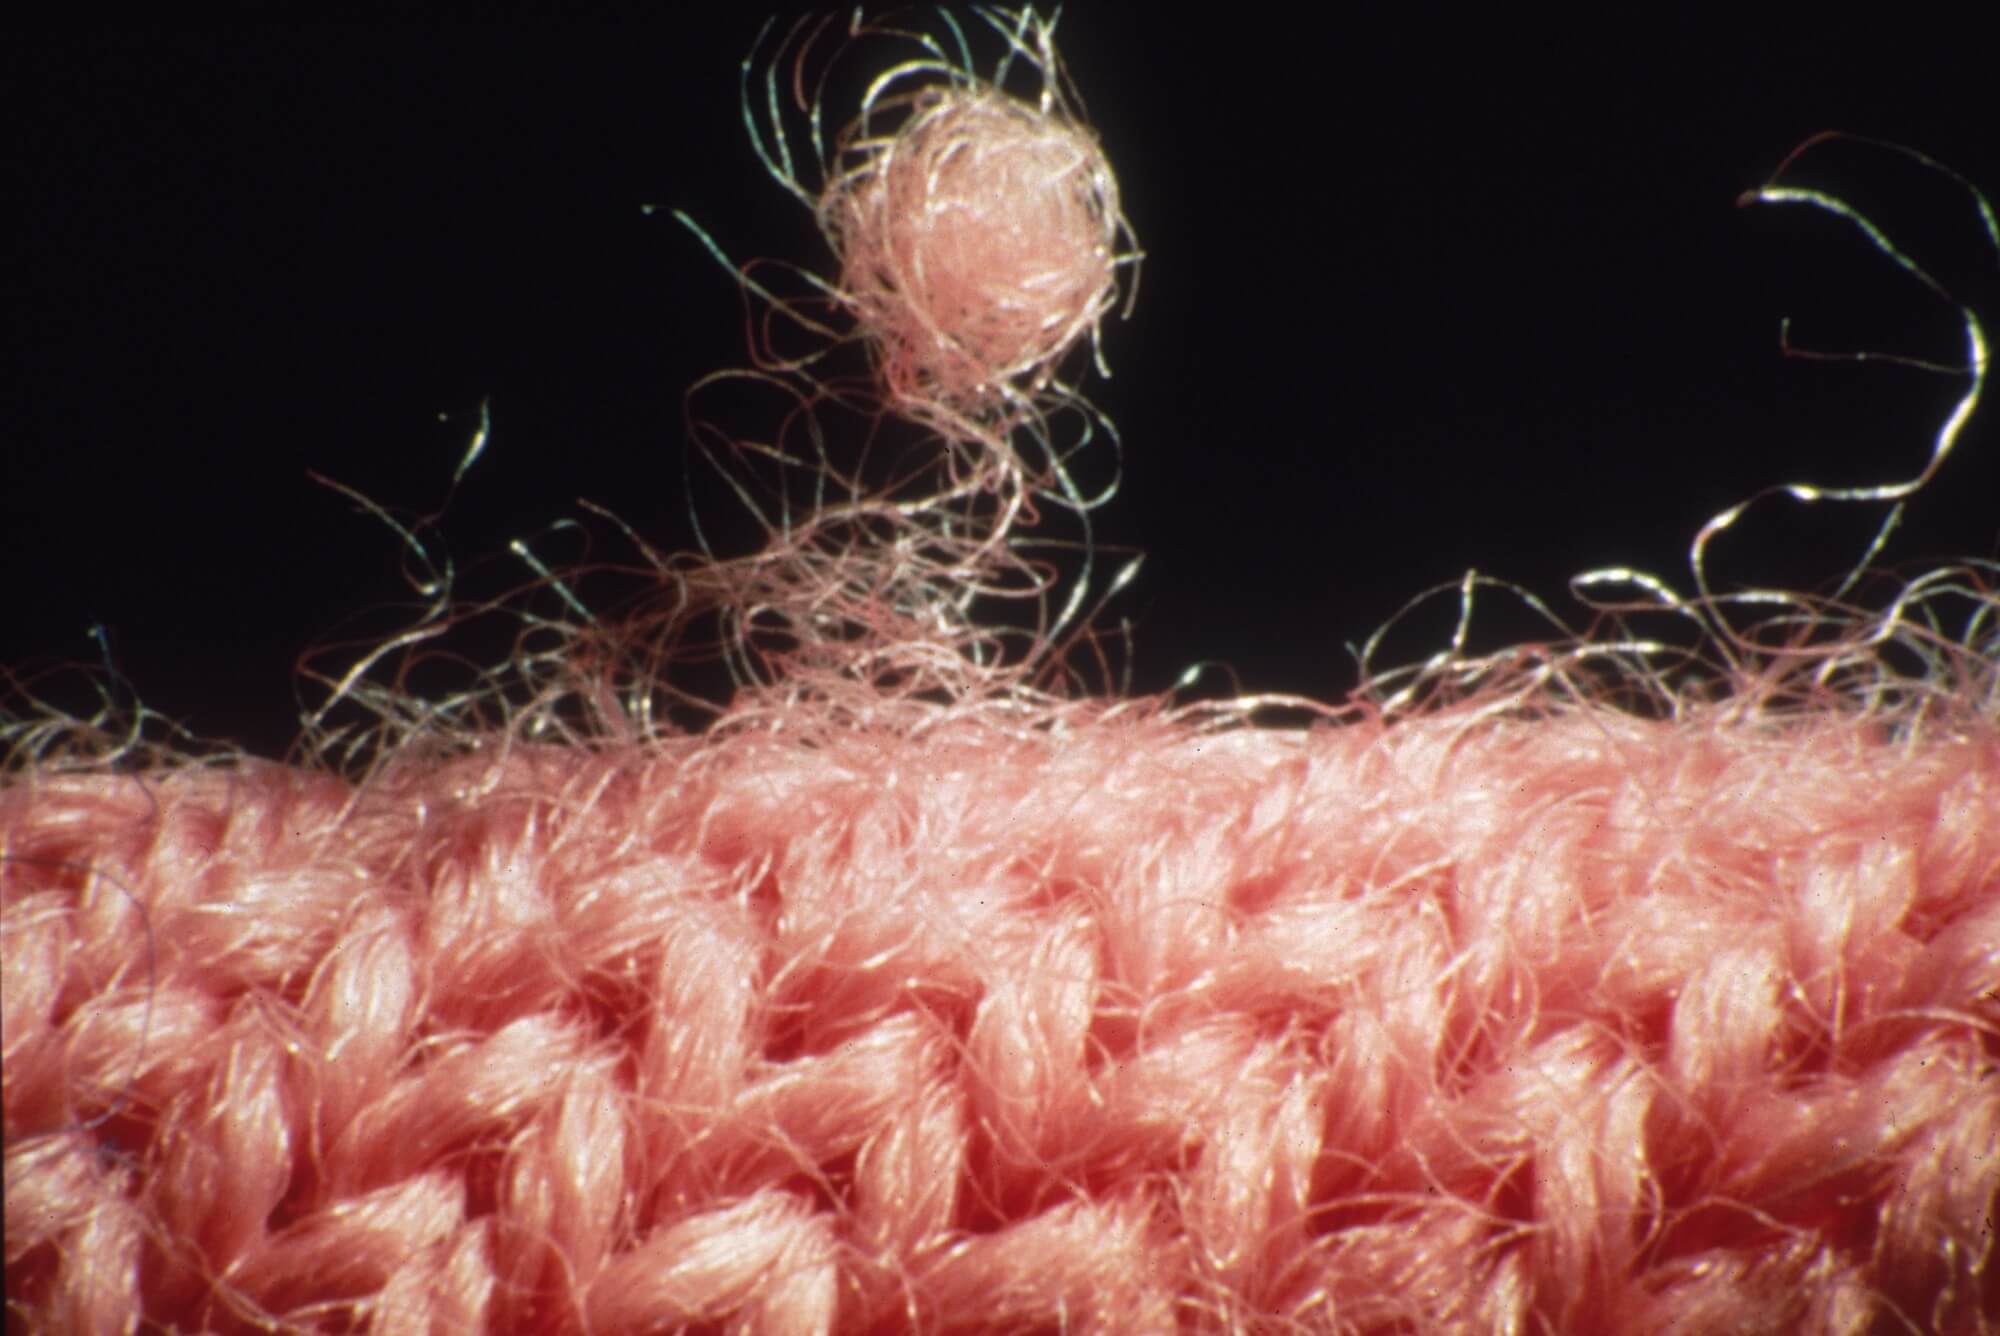 A macro close-up shot of some kind of pink wool. There are many loose threads, and one large piece of lint seemingly about to come off the fabric.